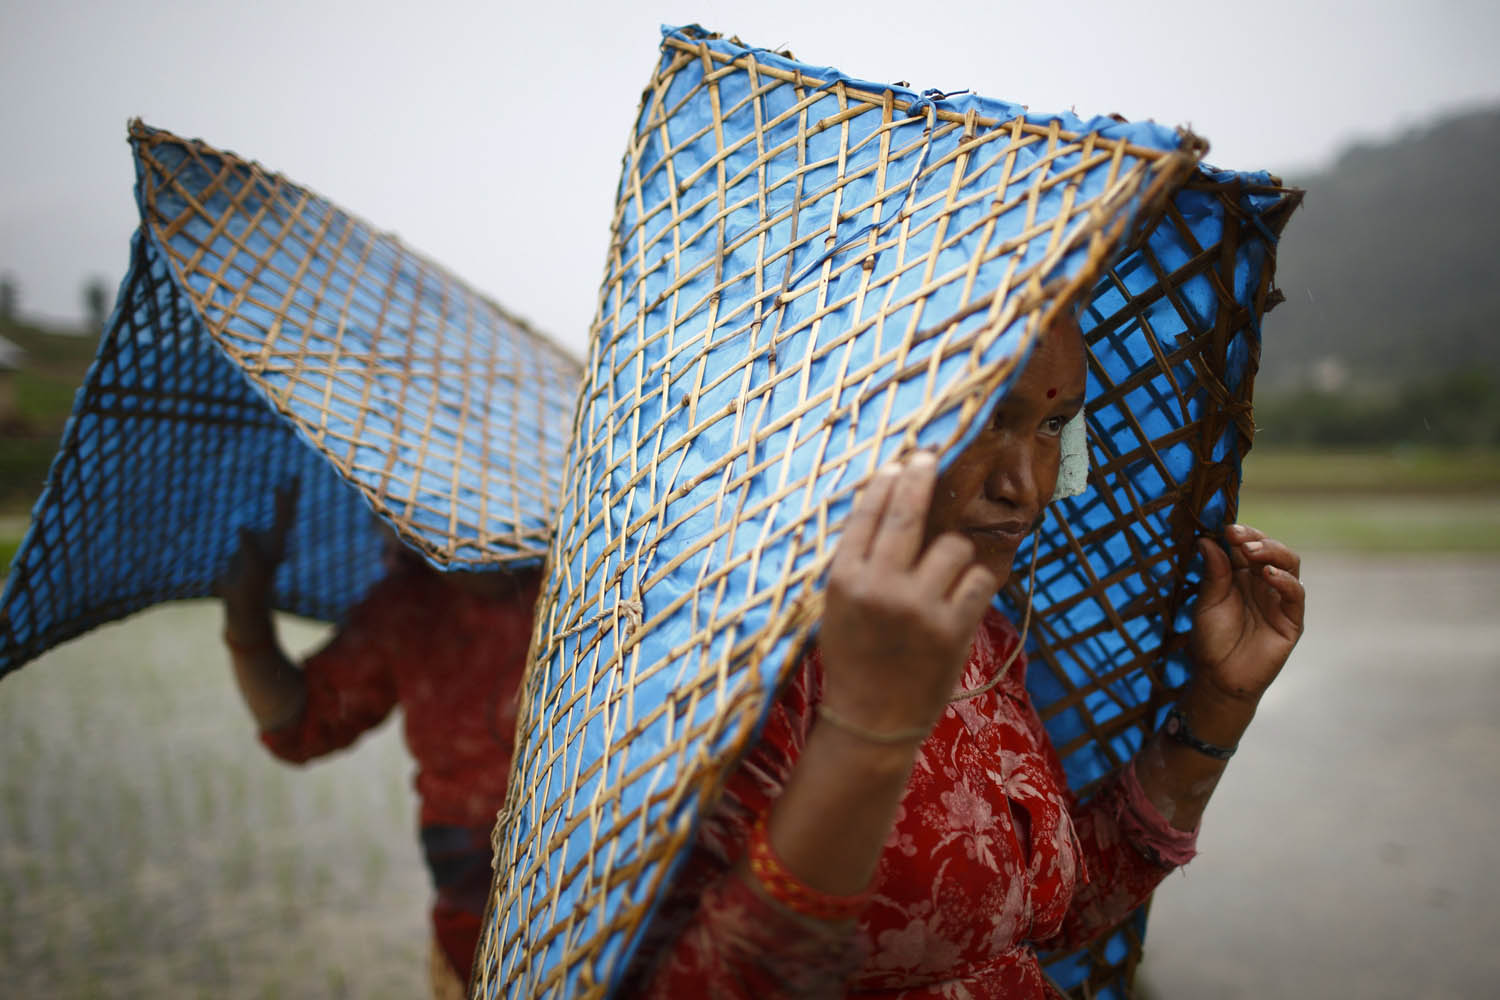 Nepalese farmer cover themselves from the rain while planting rice saplings in Khokana